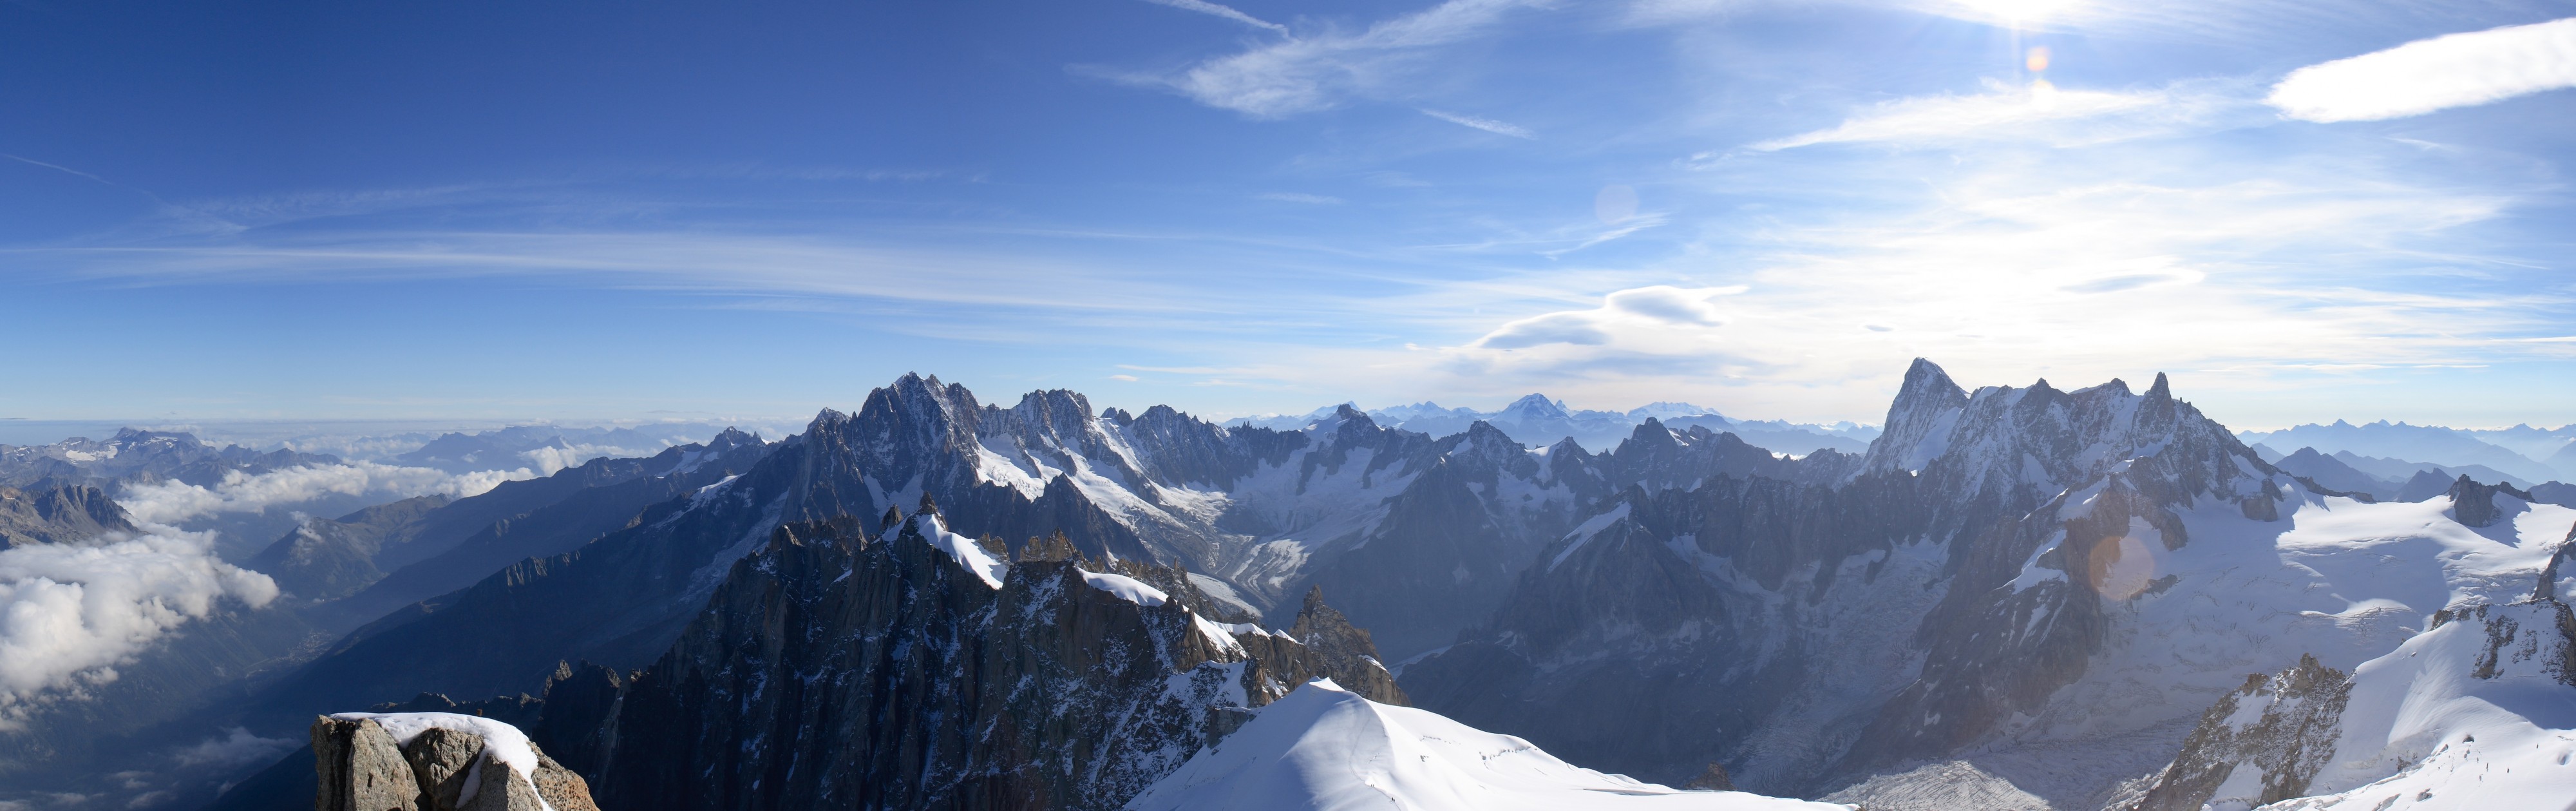 Pano from Aiguille du Midi 02